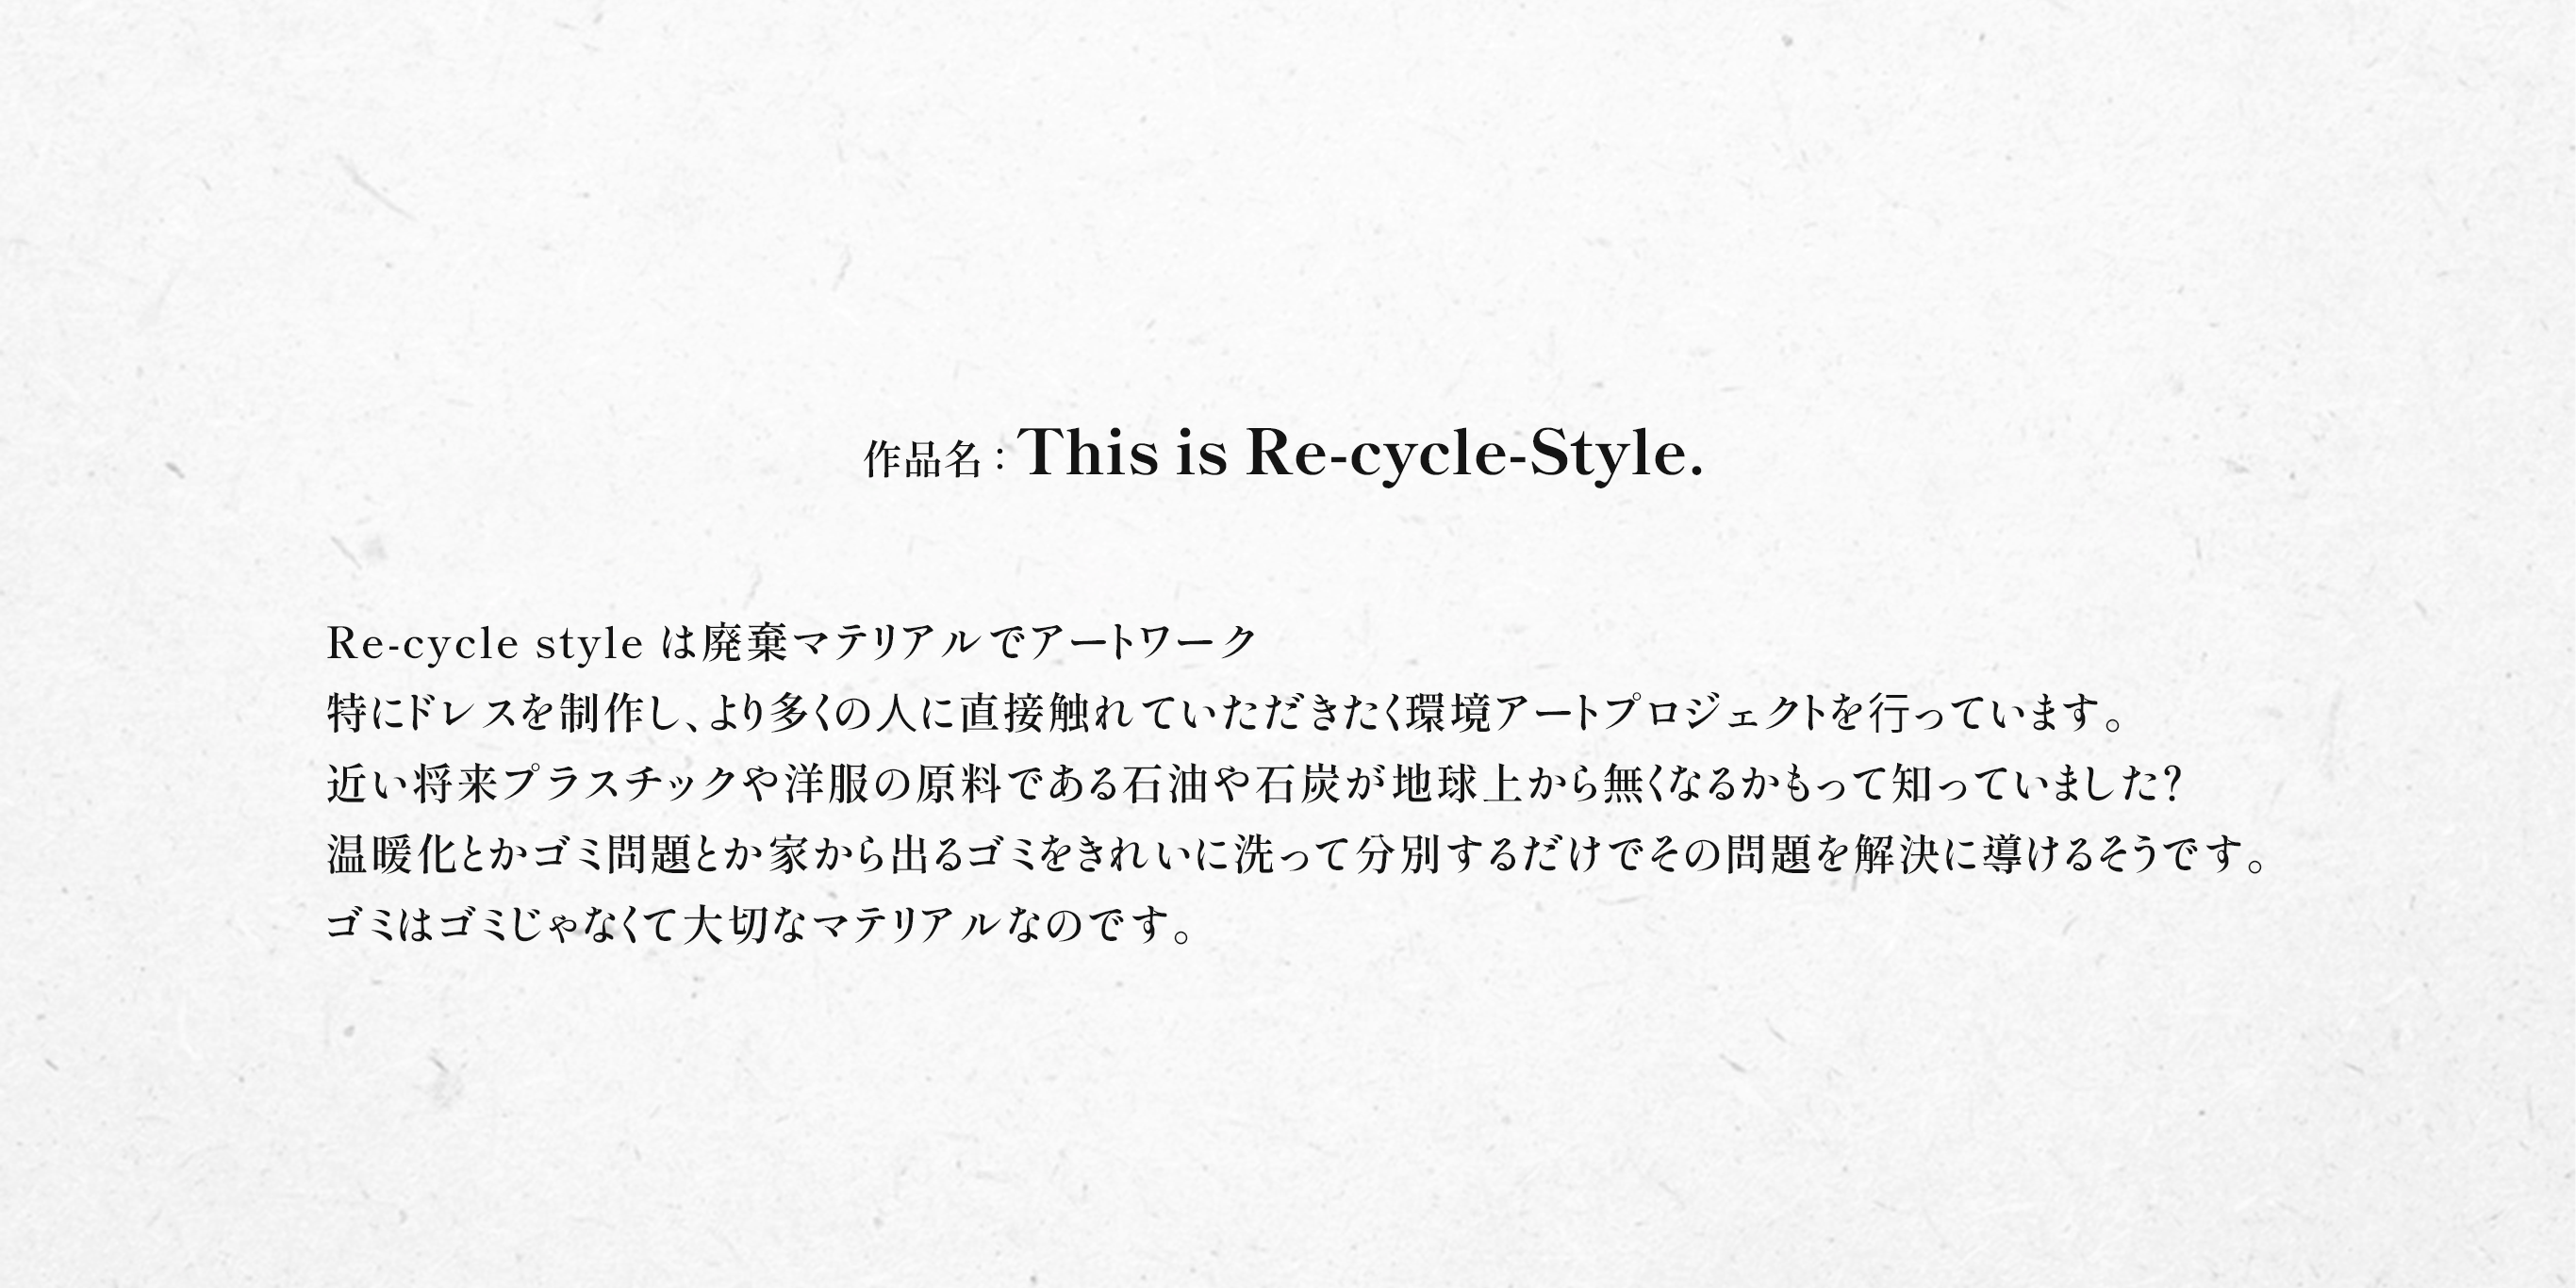 This is Re-cycle-Style.